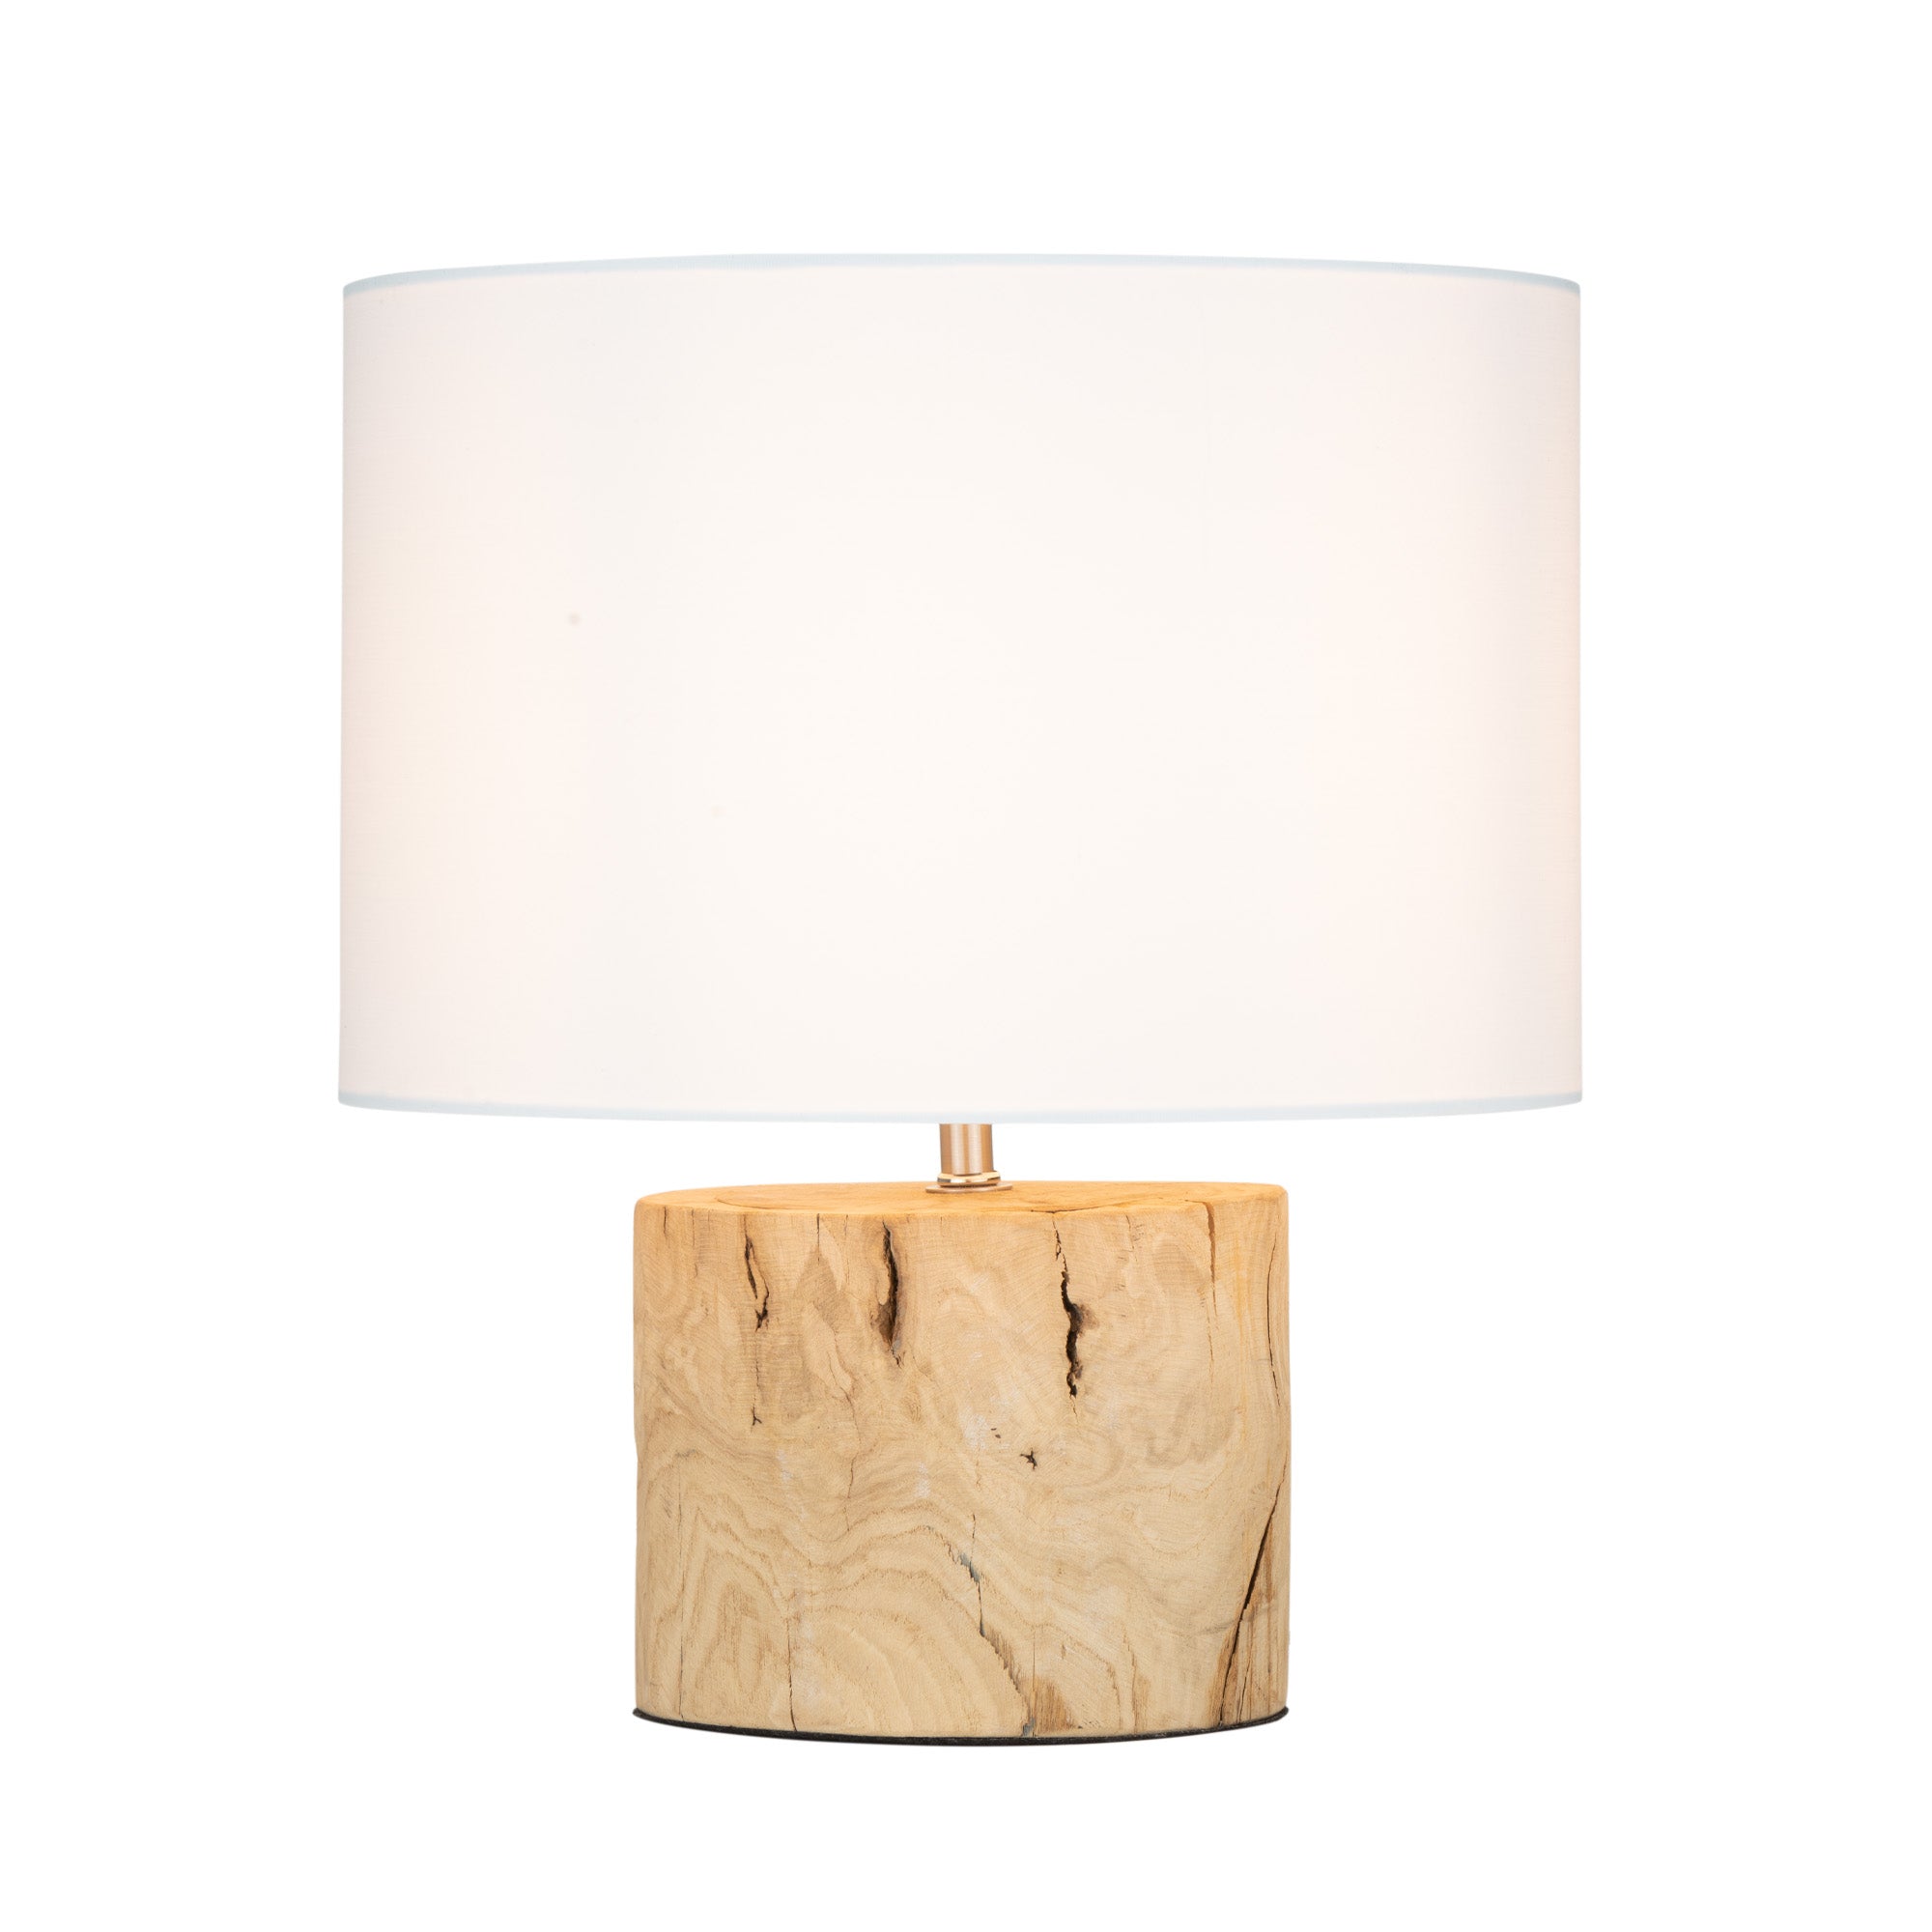 Fairfield Timber and White Modern Rustic Table Lamp